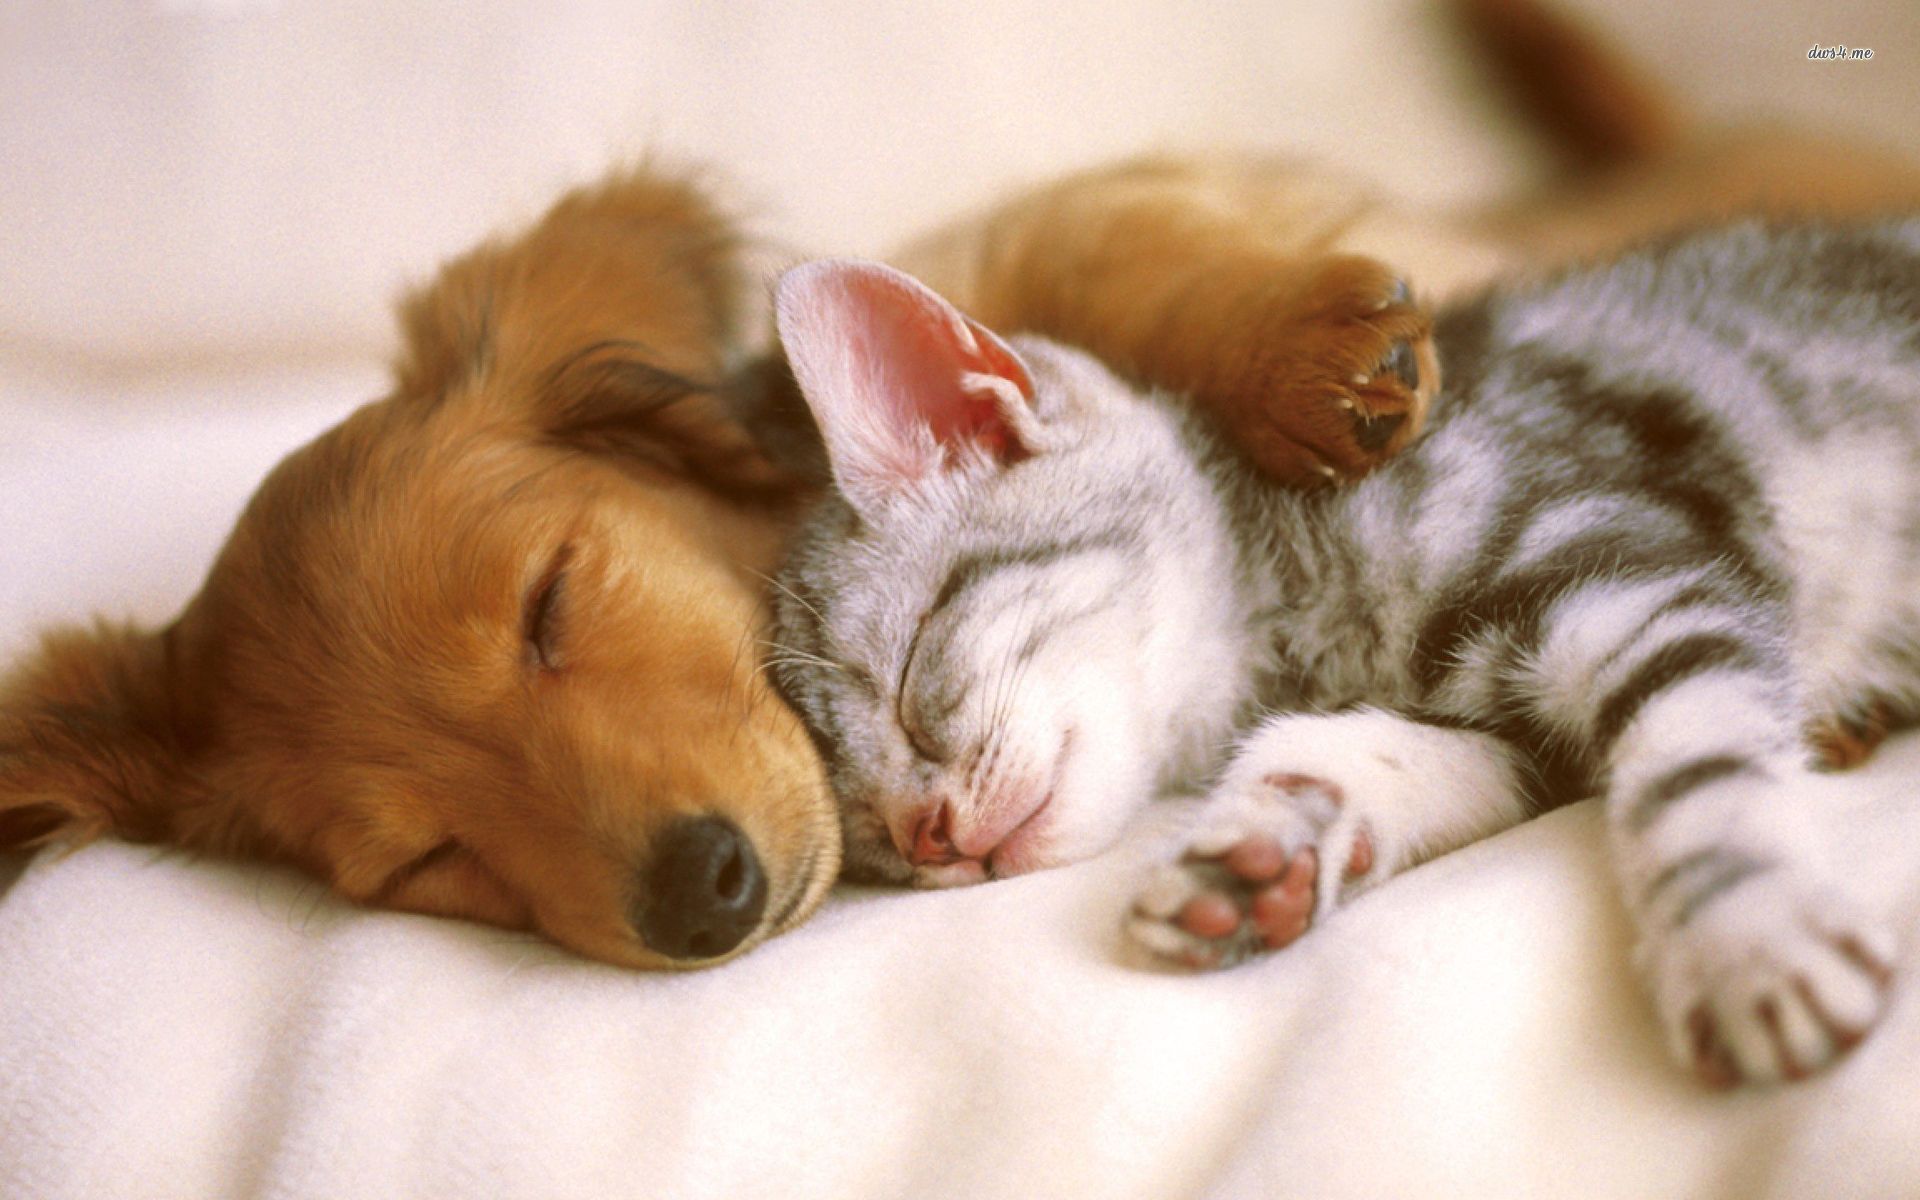 Cute Baby Puppies and Kittens Sleeping id: 4186 - 7HDWallpapers